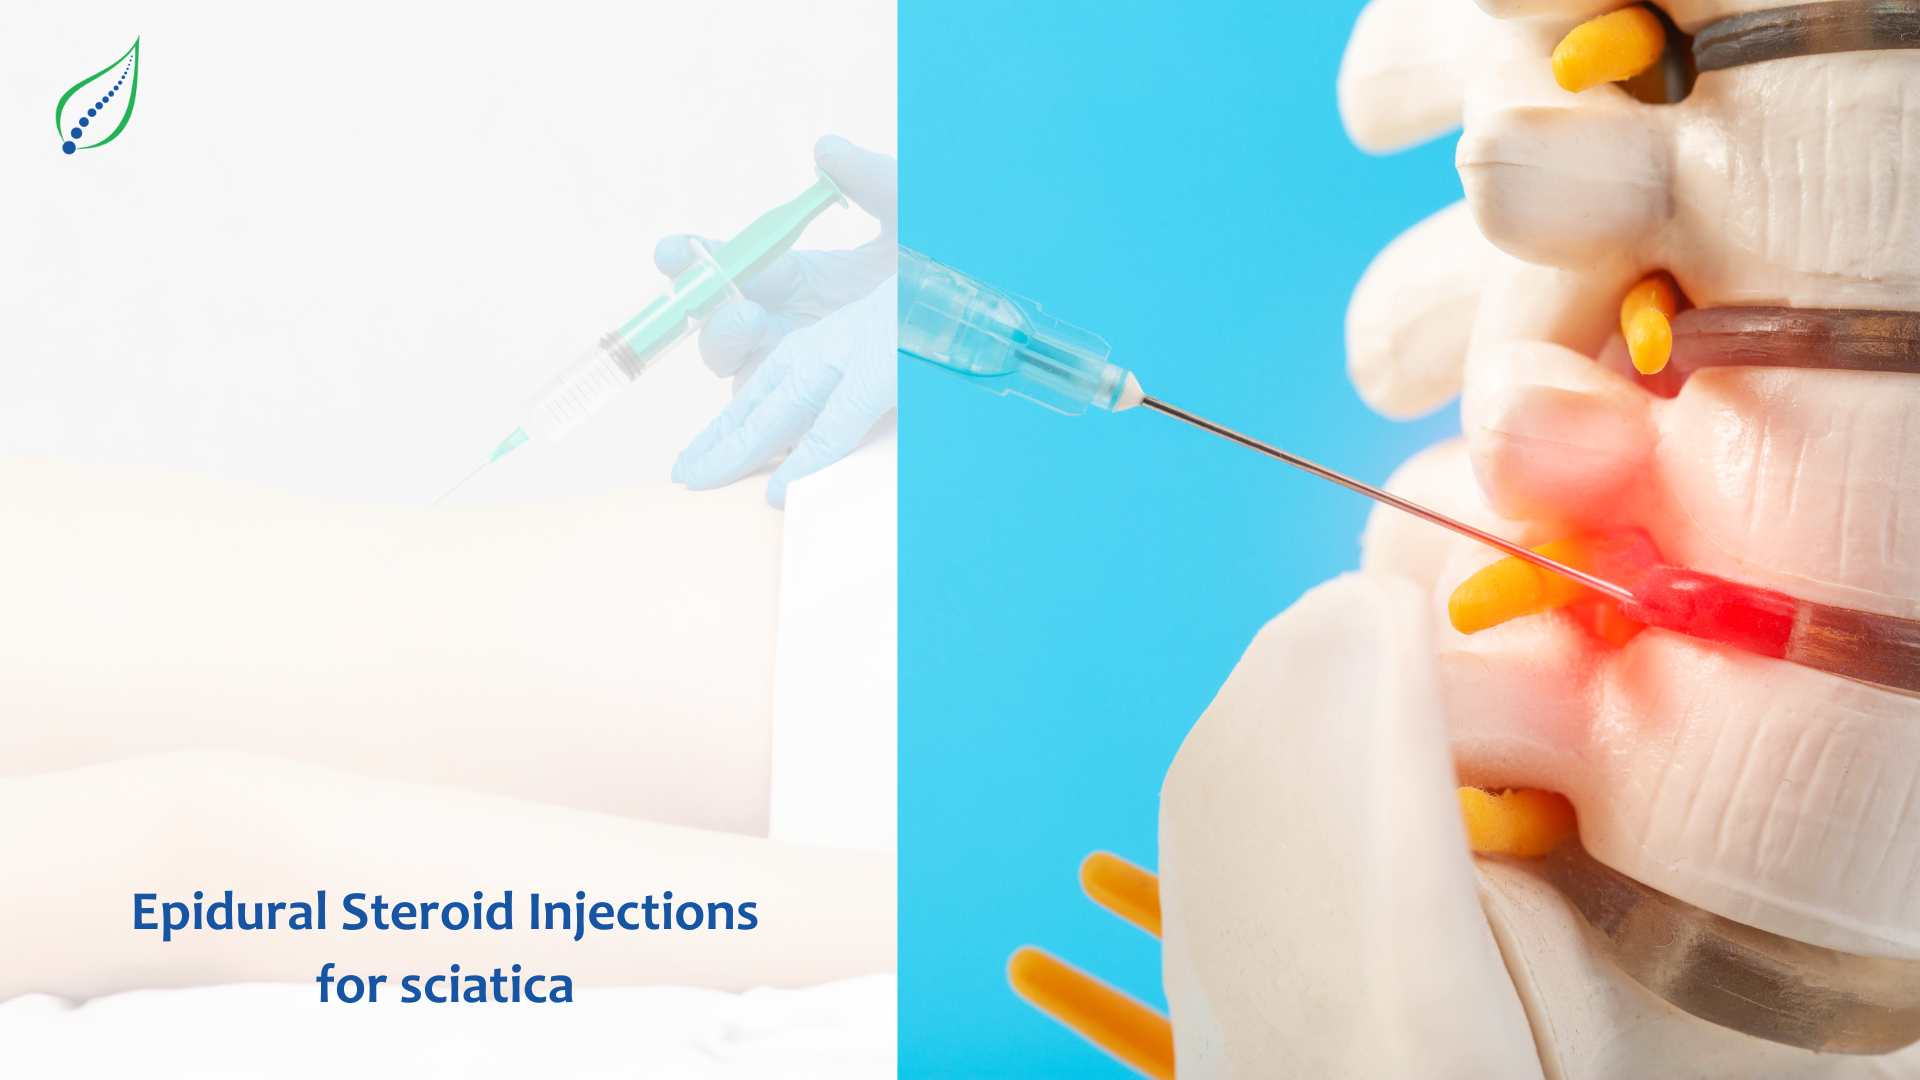 Epidural Steroid Injections For Sciatica